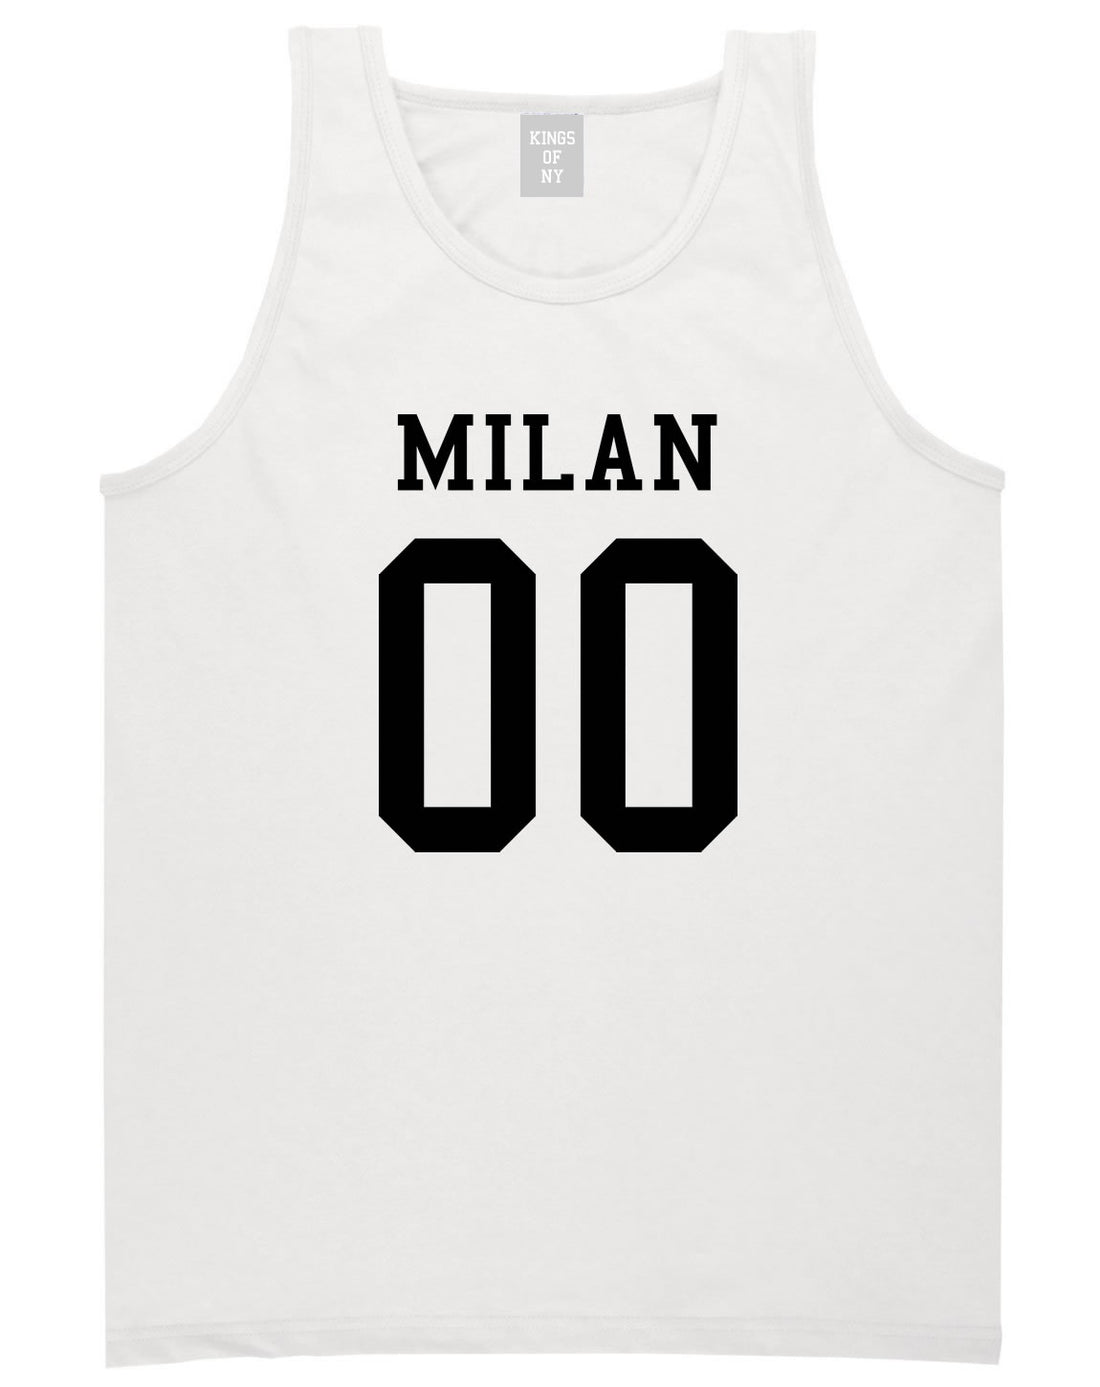 Milan Team 00 Jersey Tank Top in White By Kings Of NY